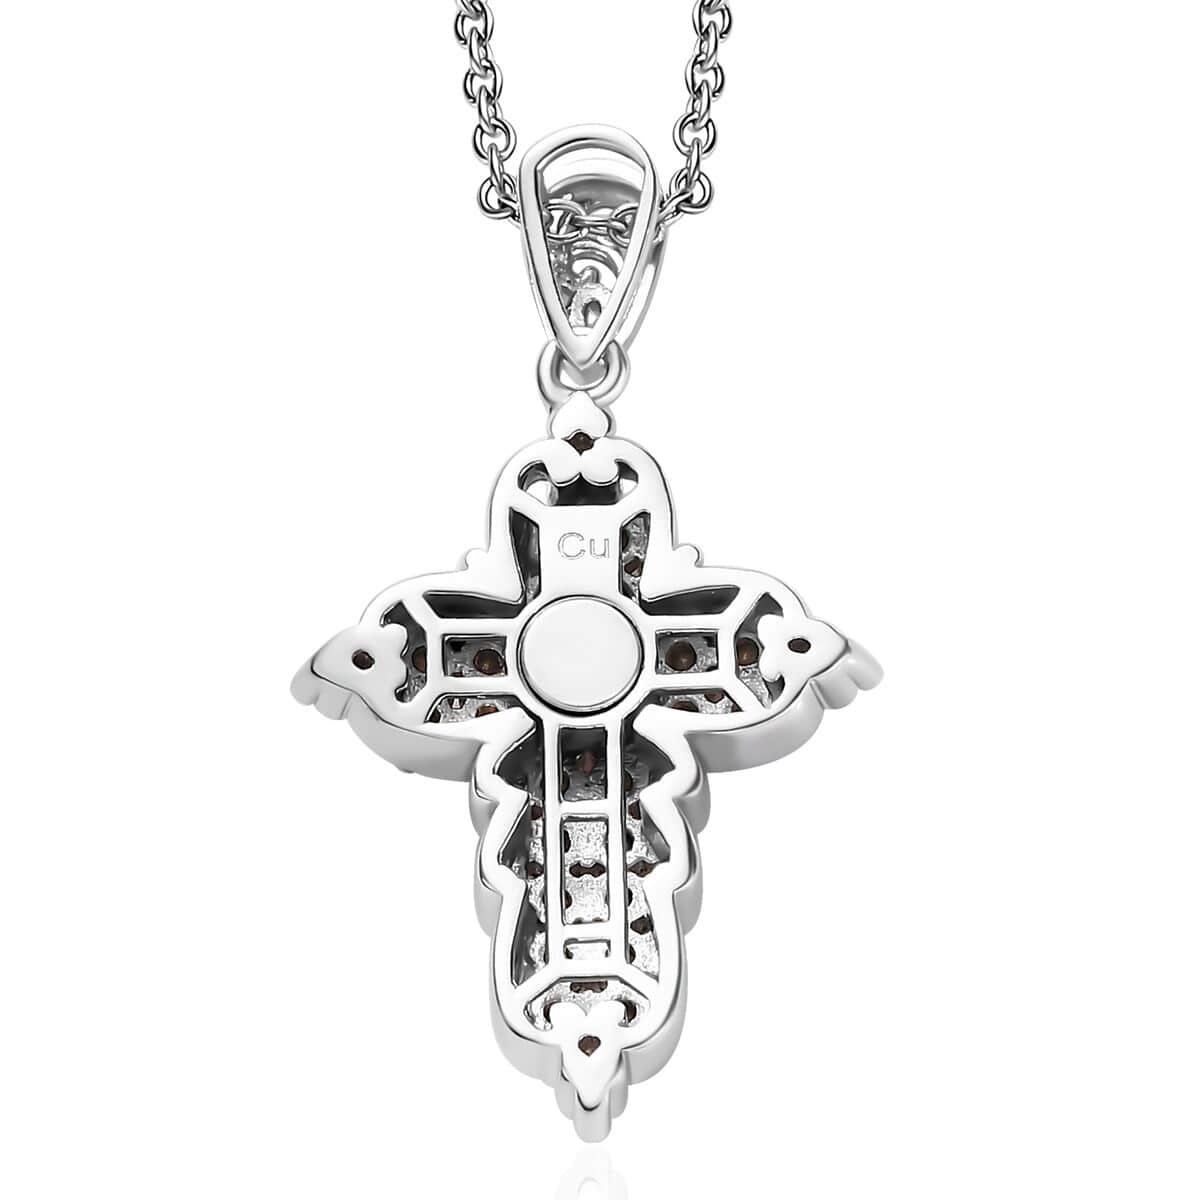 Designer Premium Foilback Amethyst Color Austrian Crystal Cross Pendant in Platinum Over Copper with Stainless Steel Necklace 20 Inches image number 4